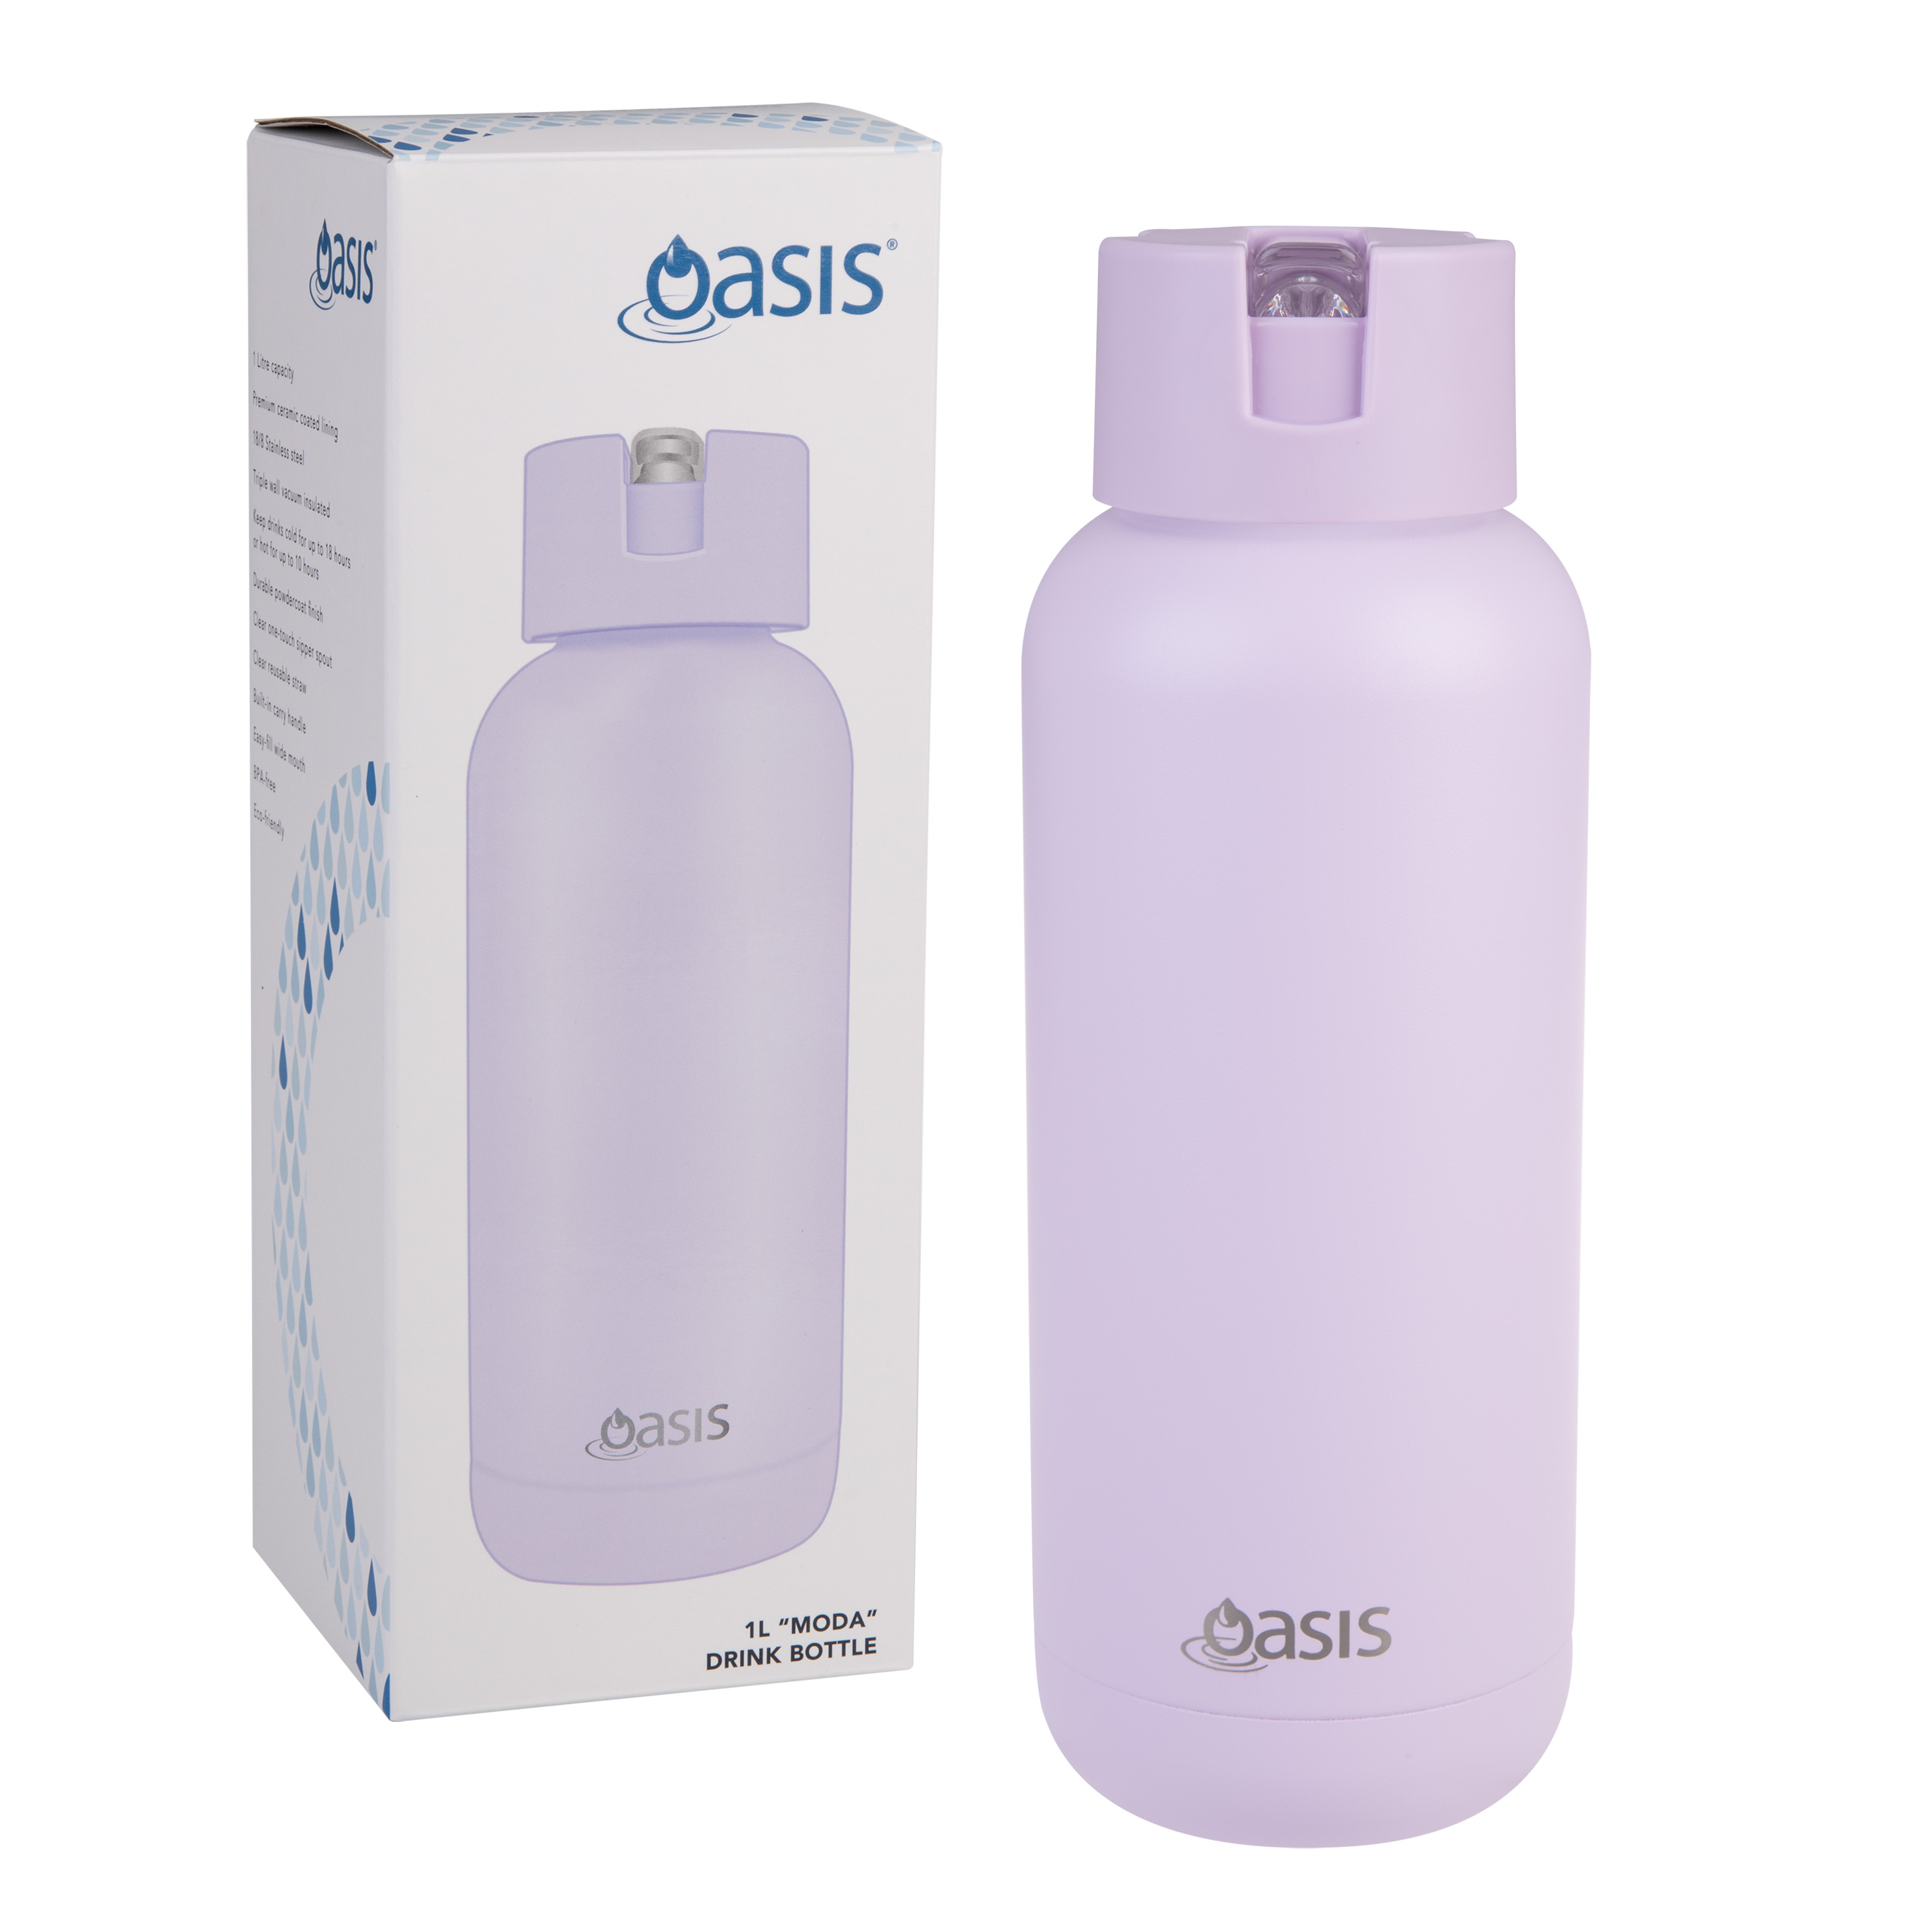 Oasis Stainless Steel Ceramic Moda Triple Wall Insulated Drink Bottle 1 Litre Orchid